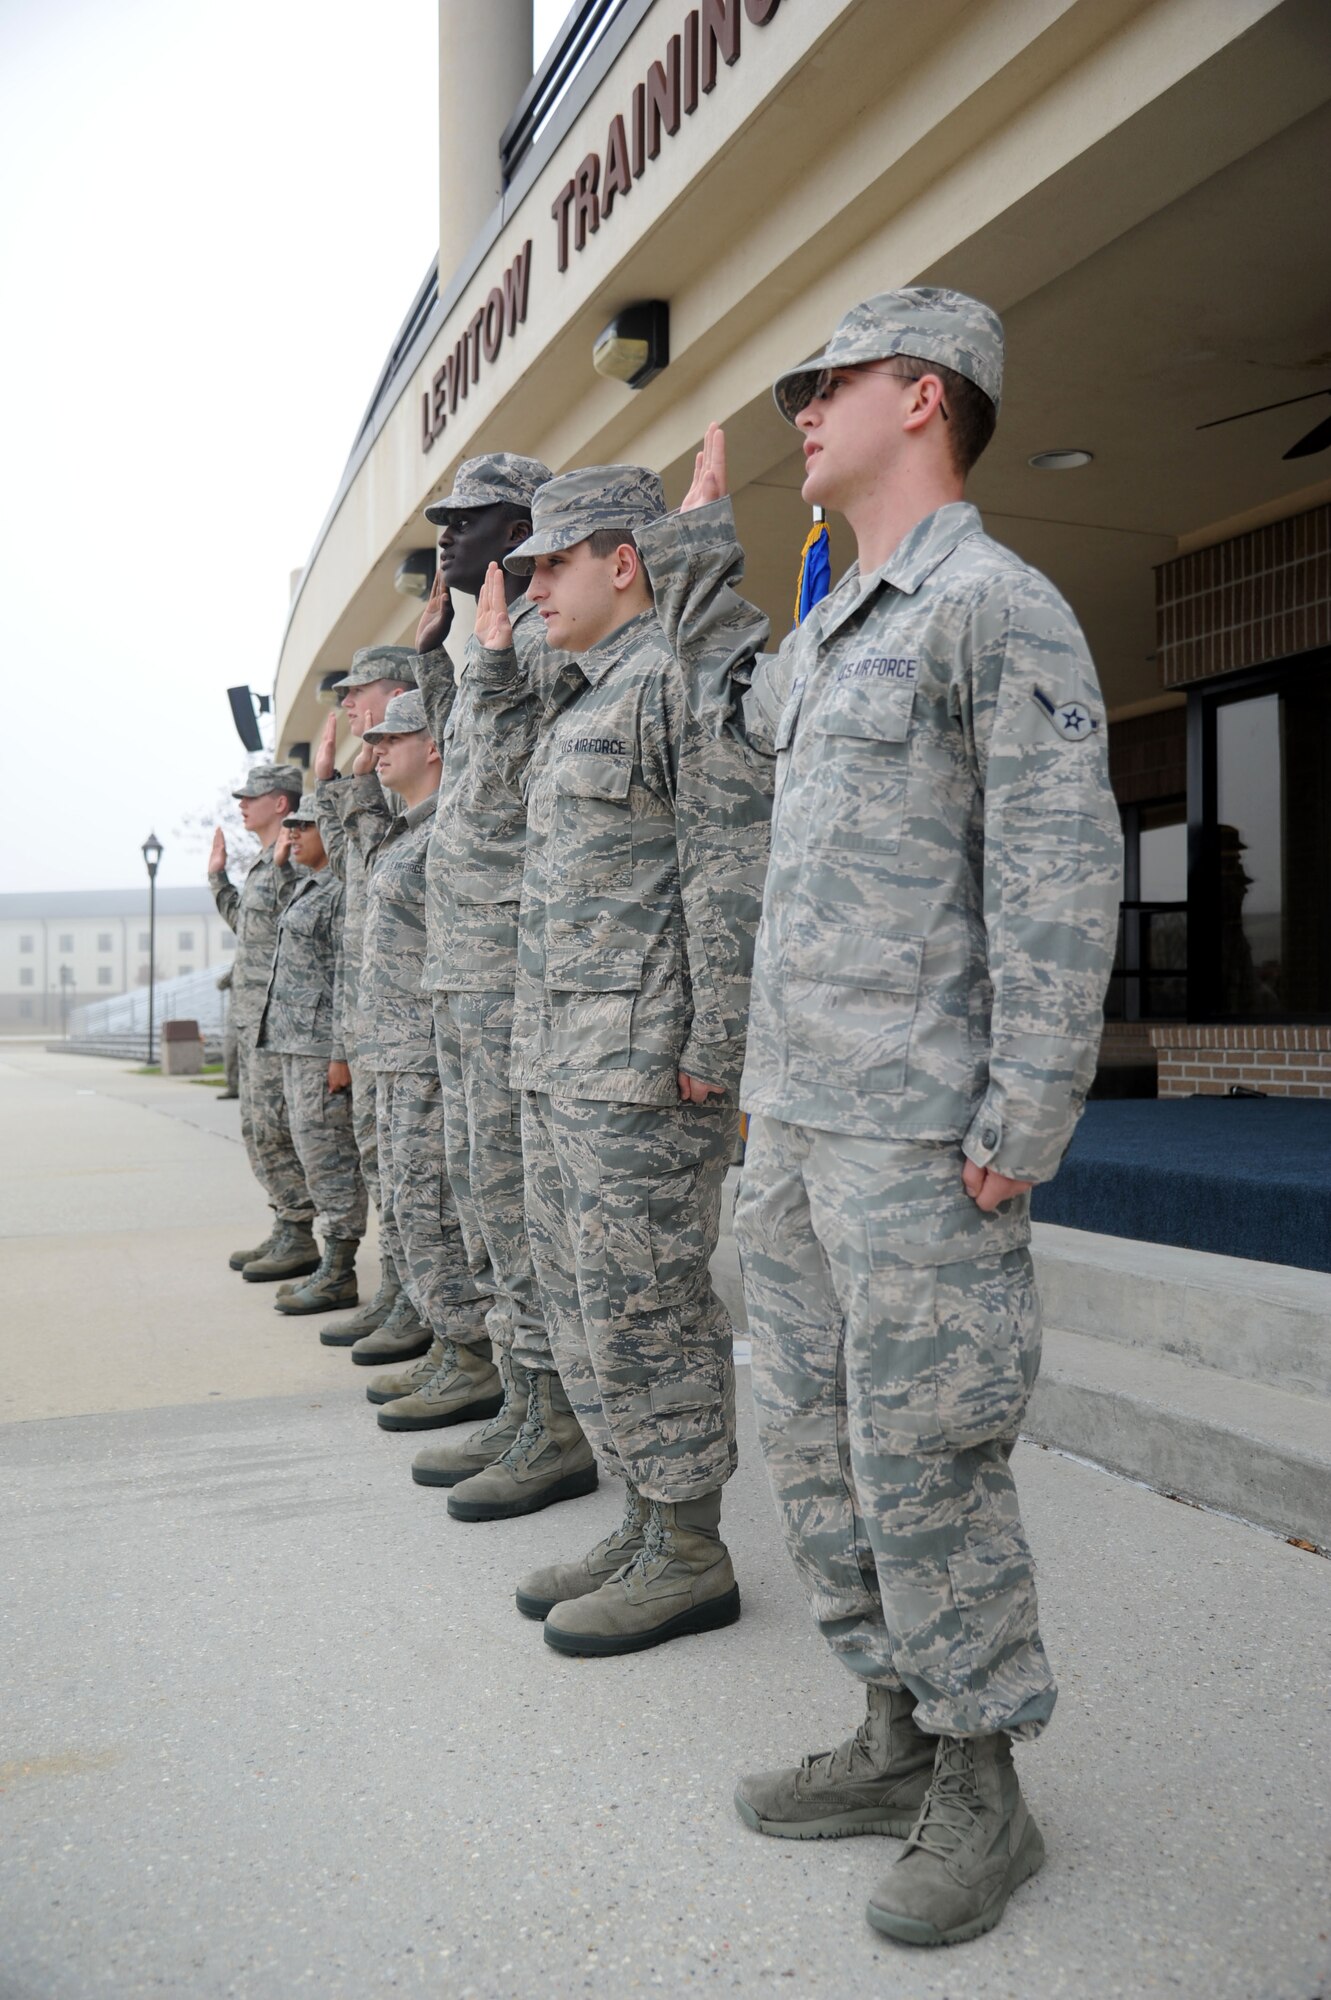 Seven of the 20 Training Group’s newest Airmen promotees repeat the oath of enlistment as it is administered by Col. George Tombe, 81st Training Group commander, during a dragon recognition presentation Feb. 4, 2014, behind the Levitow Training Support Facility, Keesler Air Force Base, Miss.  The ceremony reinforced their commitment as they take on new responsibilities with their promotion. The event also included the announcements of Airman of the Month and military training flight of the Month for January.  (U.S. Air Force photo by Kemberly Groue)